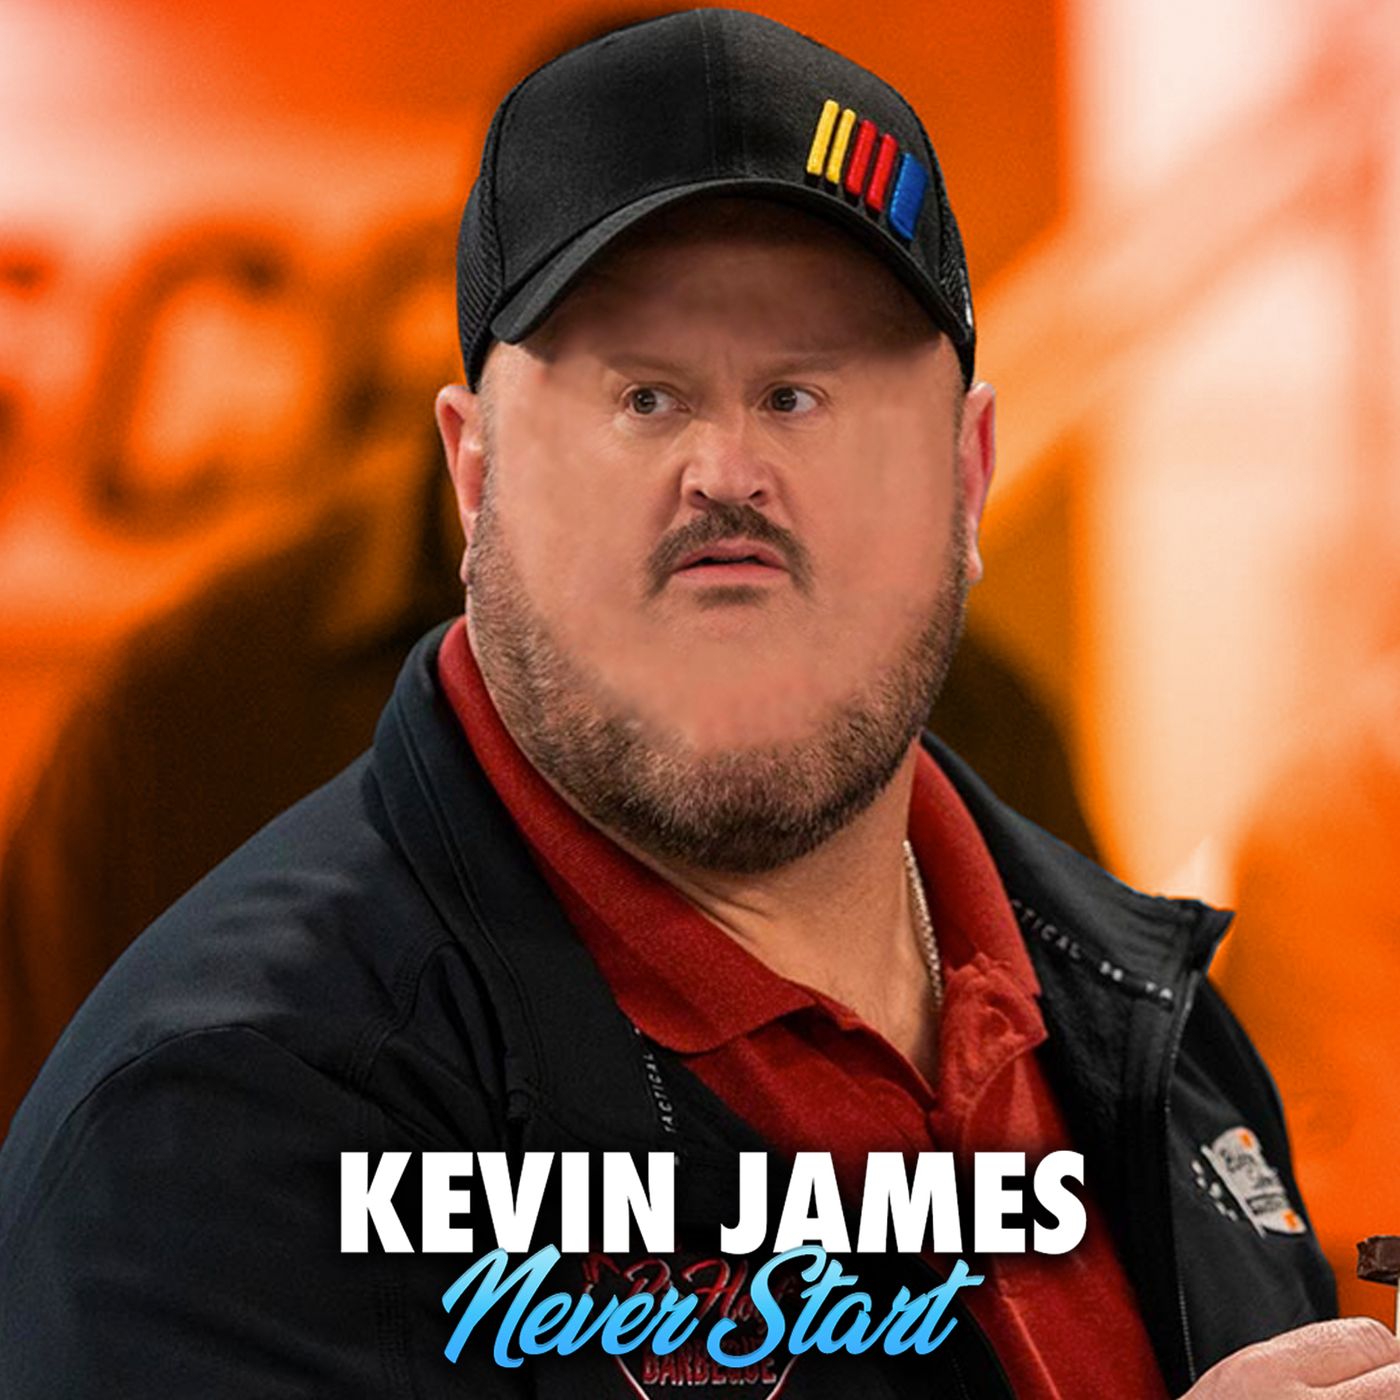 121 - The Crew (Kevin James Never Start)